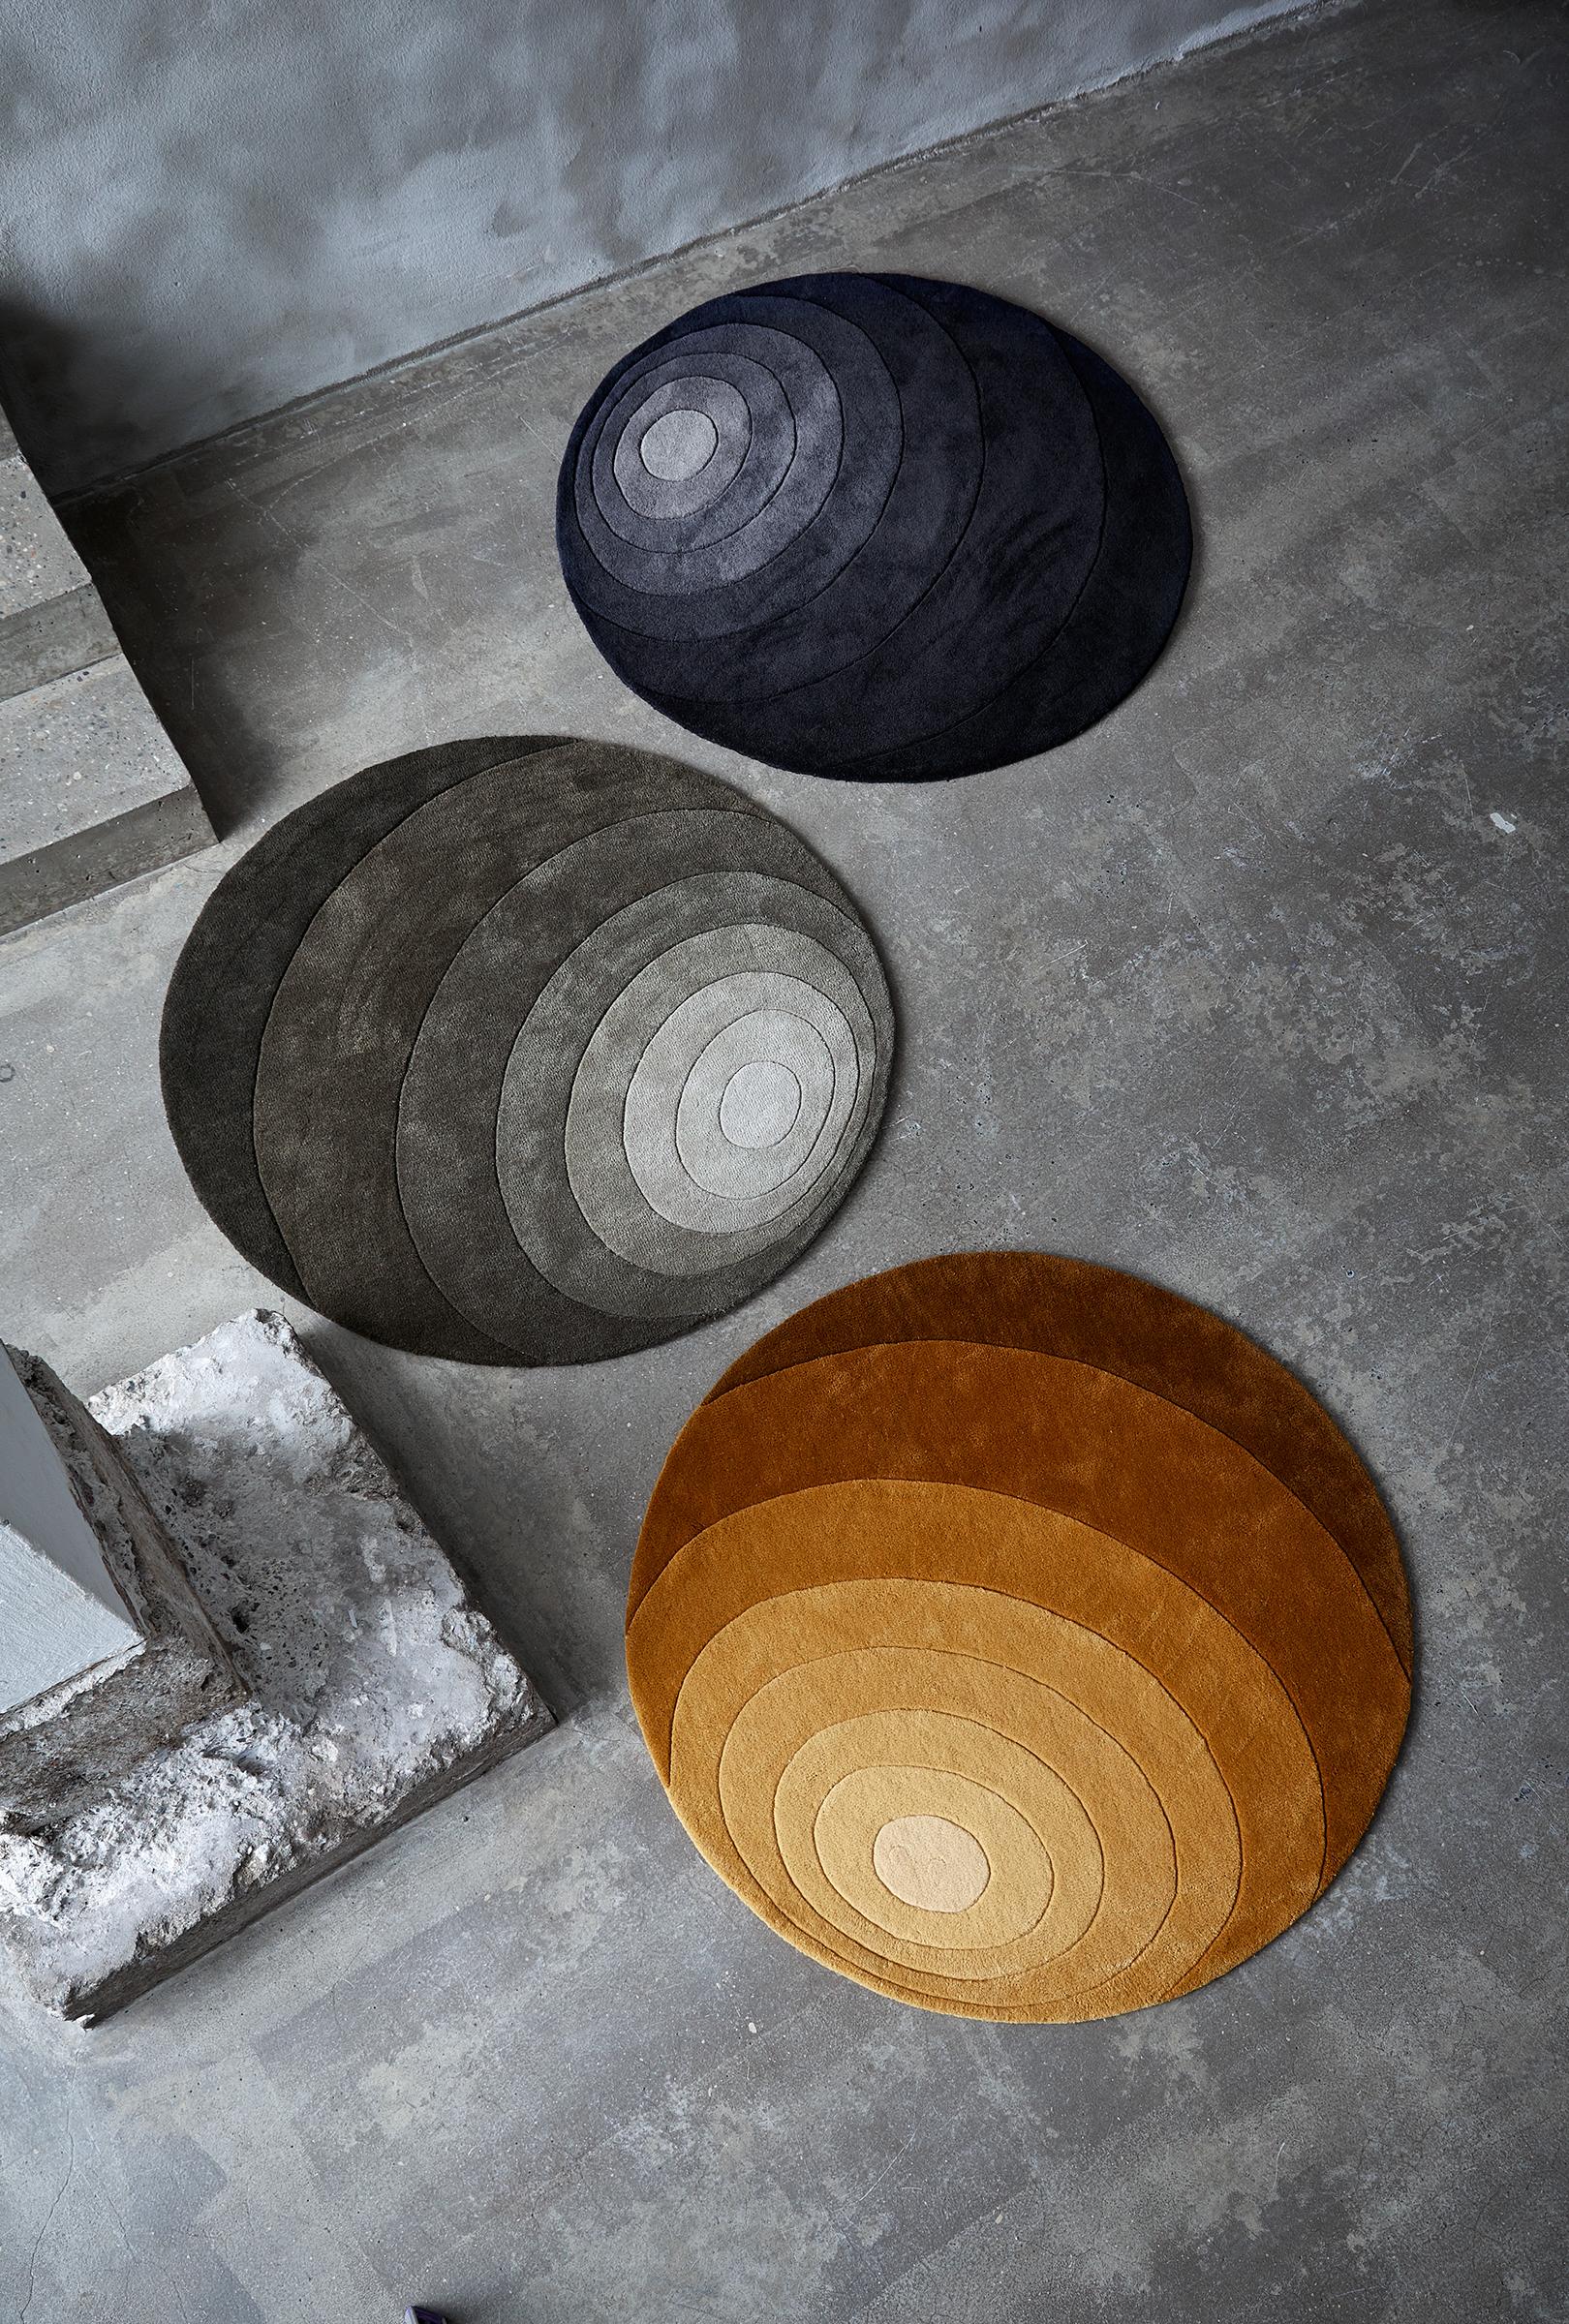 Eight colored rug with organic circle pattern designed by Verner Panton.

Material:
100% New Zealand wool
Hand-tufted

Color:
Tone-in-tone gray.